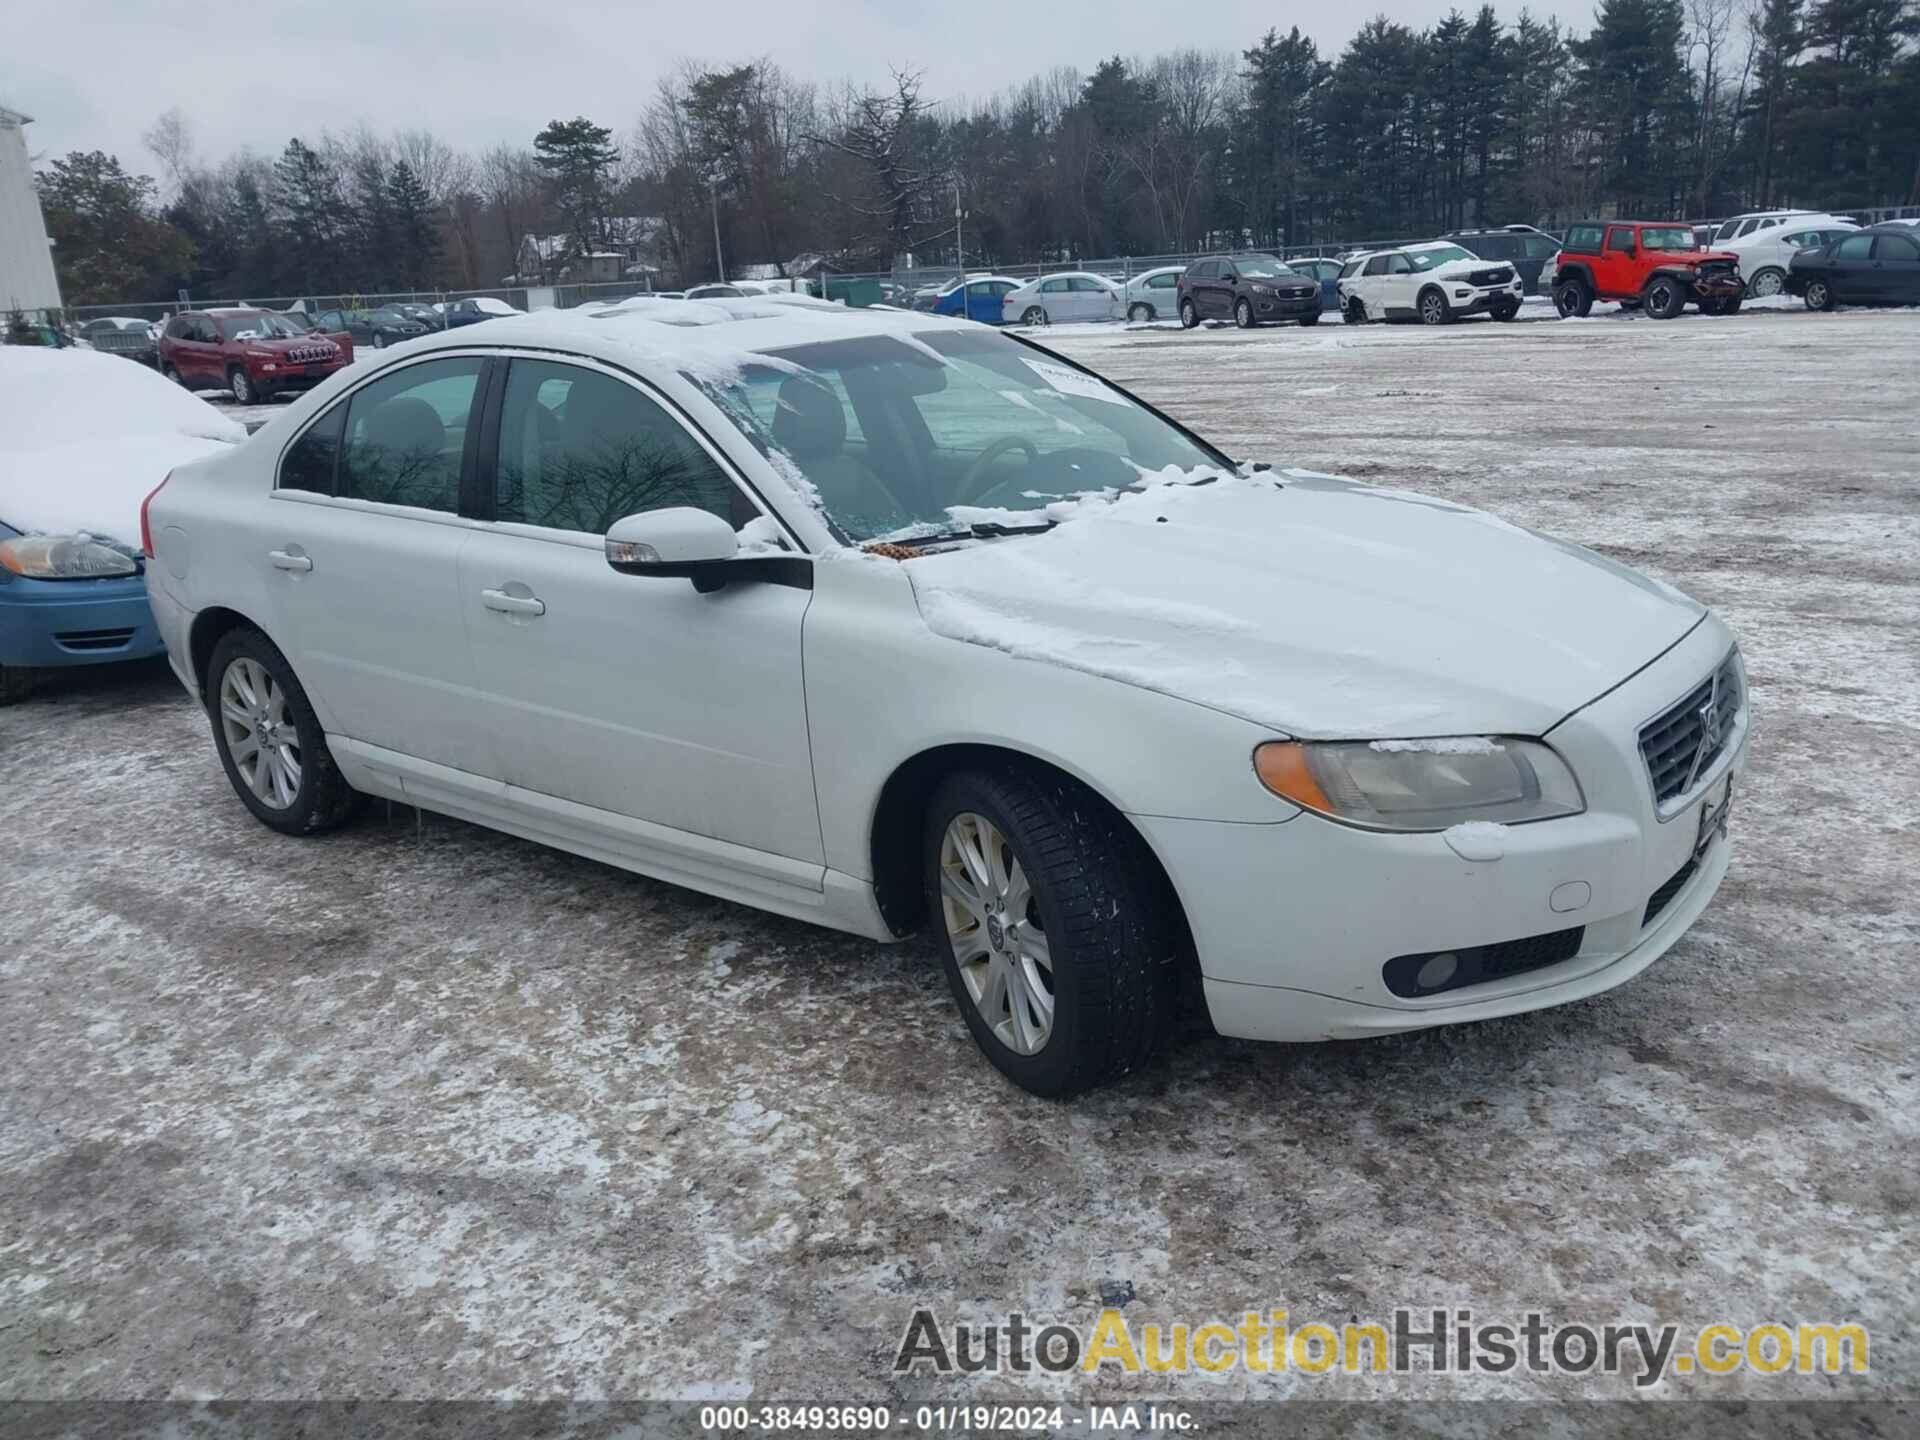 VOLVO S80 3.2, YV1AS982791092282